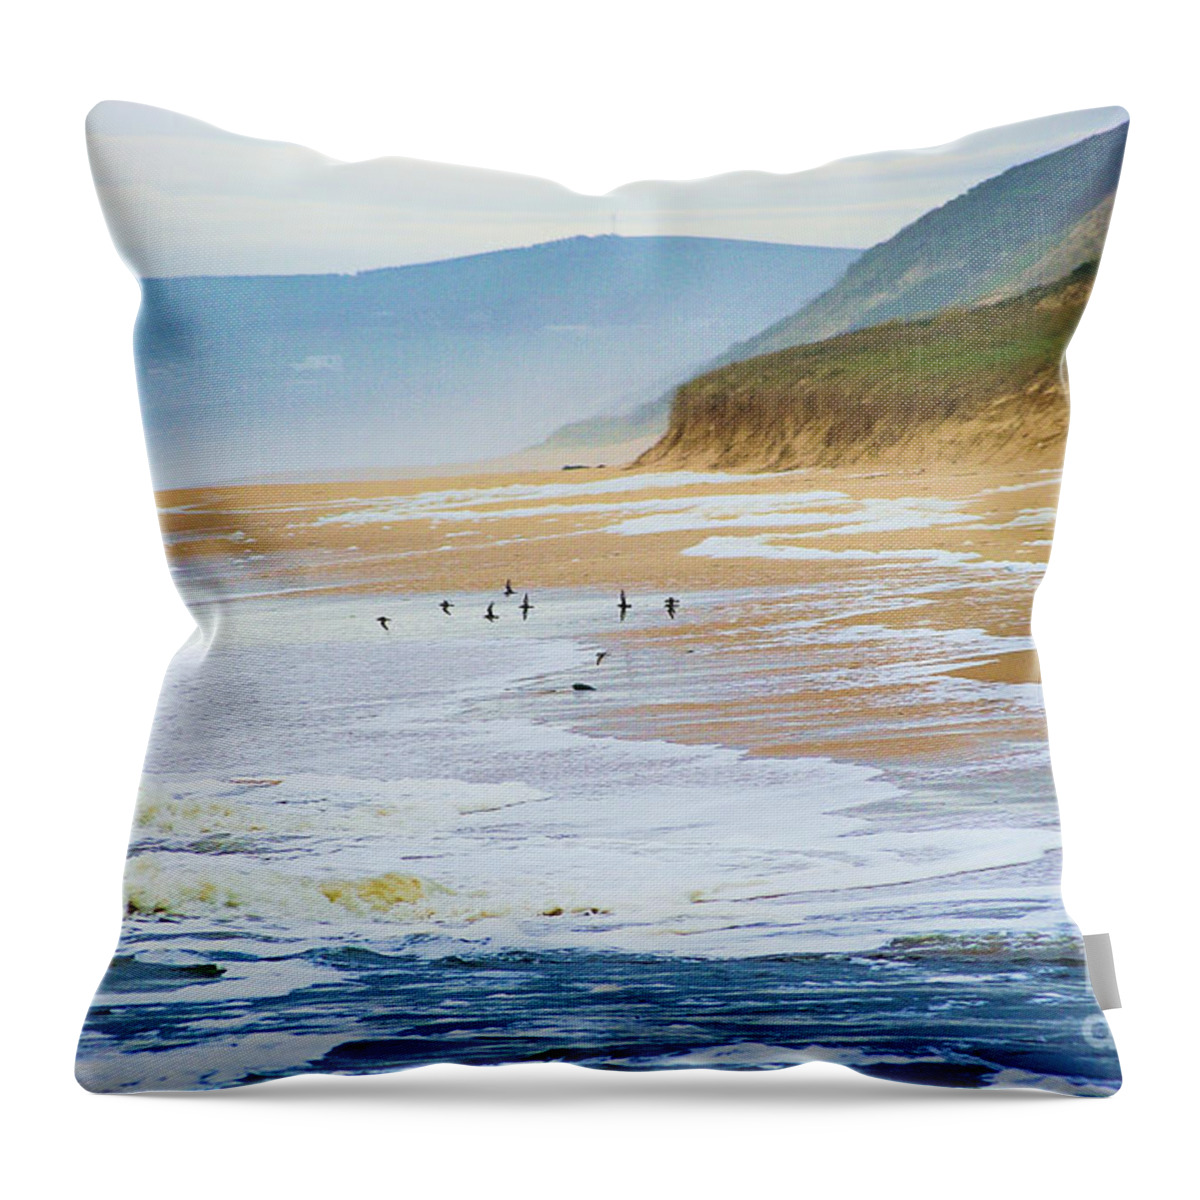 Powlet River Throw Pillow featuring the photograph Stormy Morning 3 by Blair Stuart